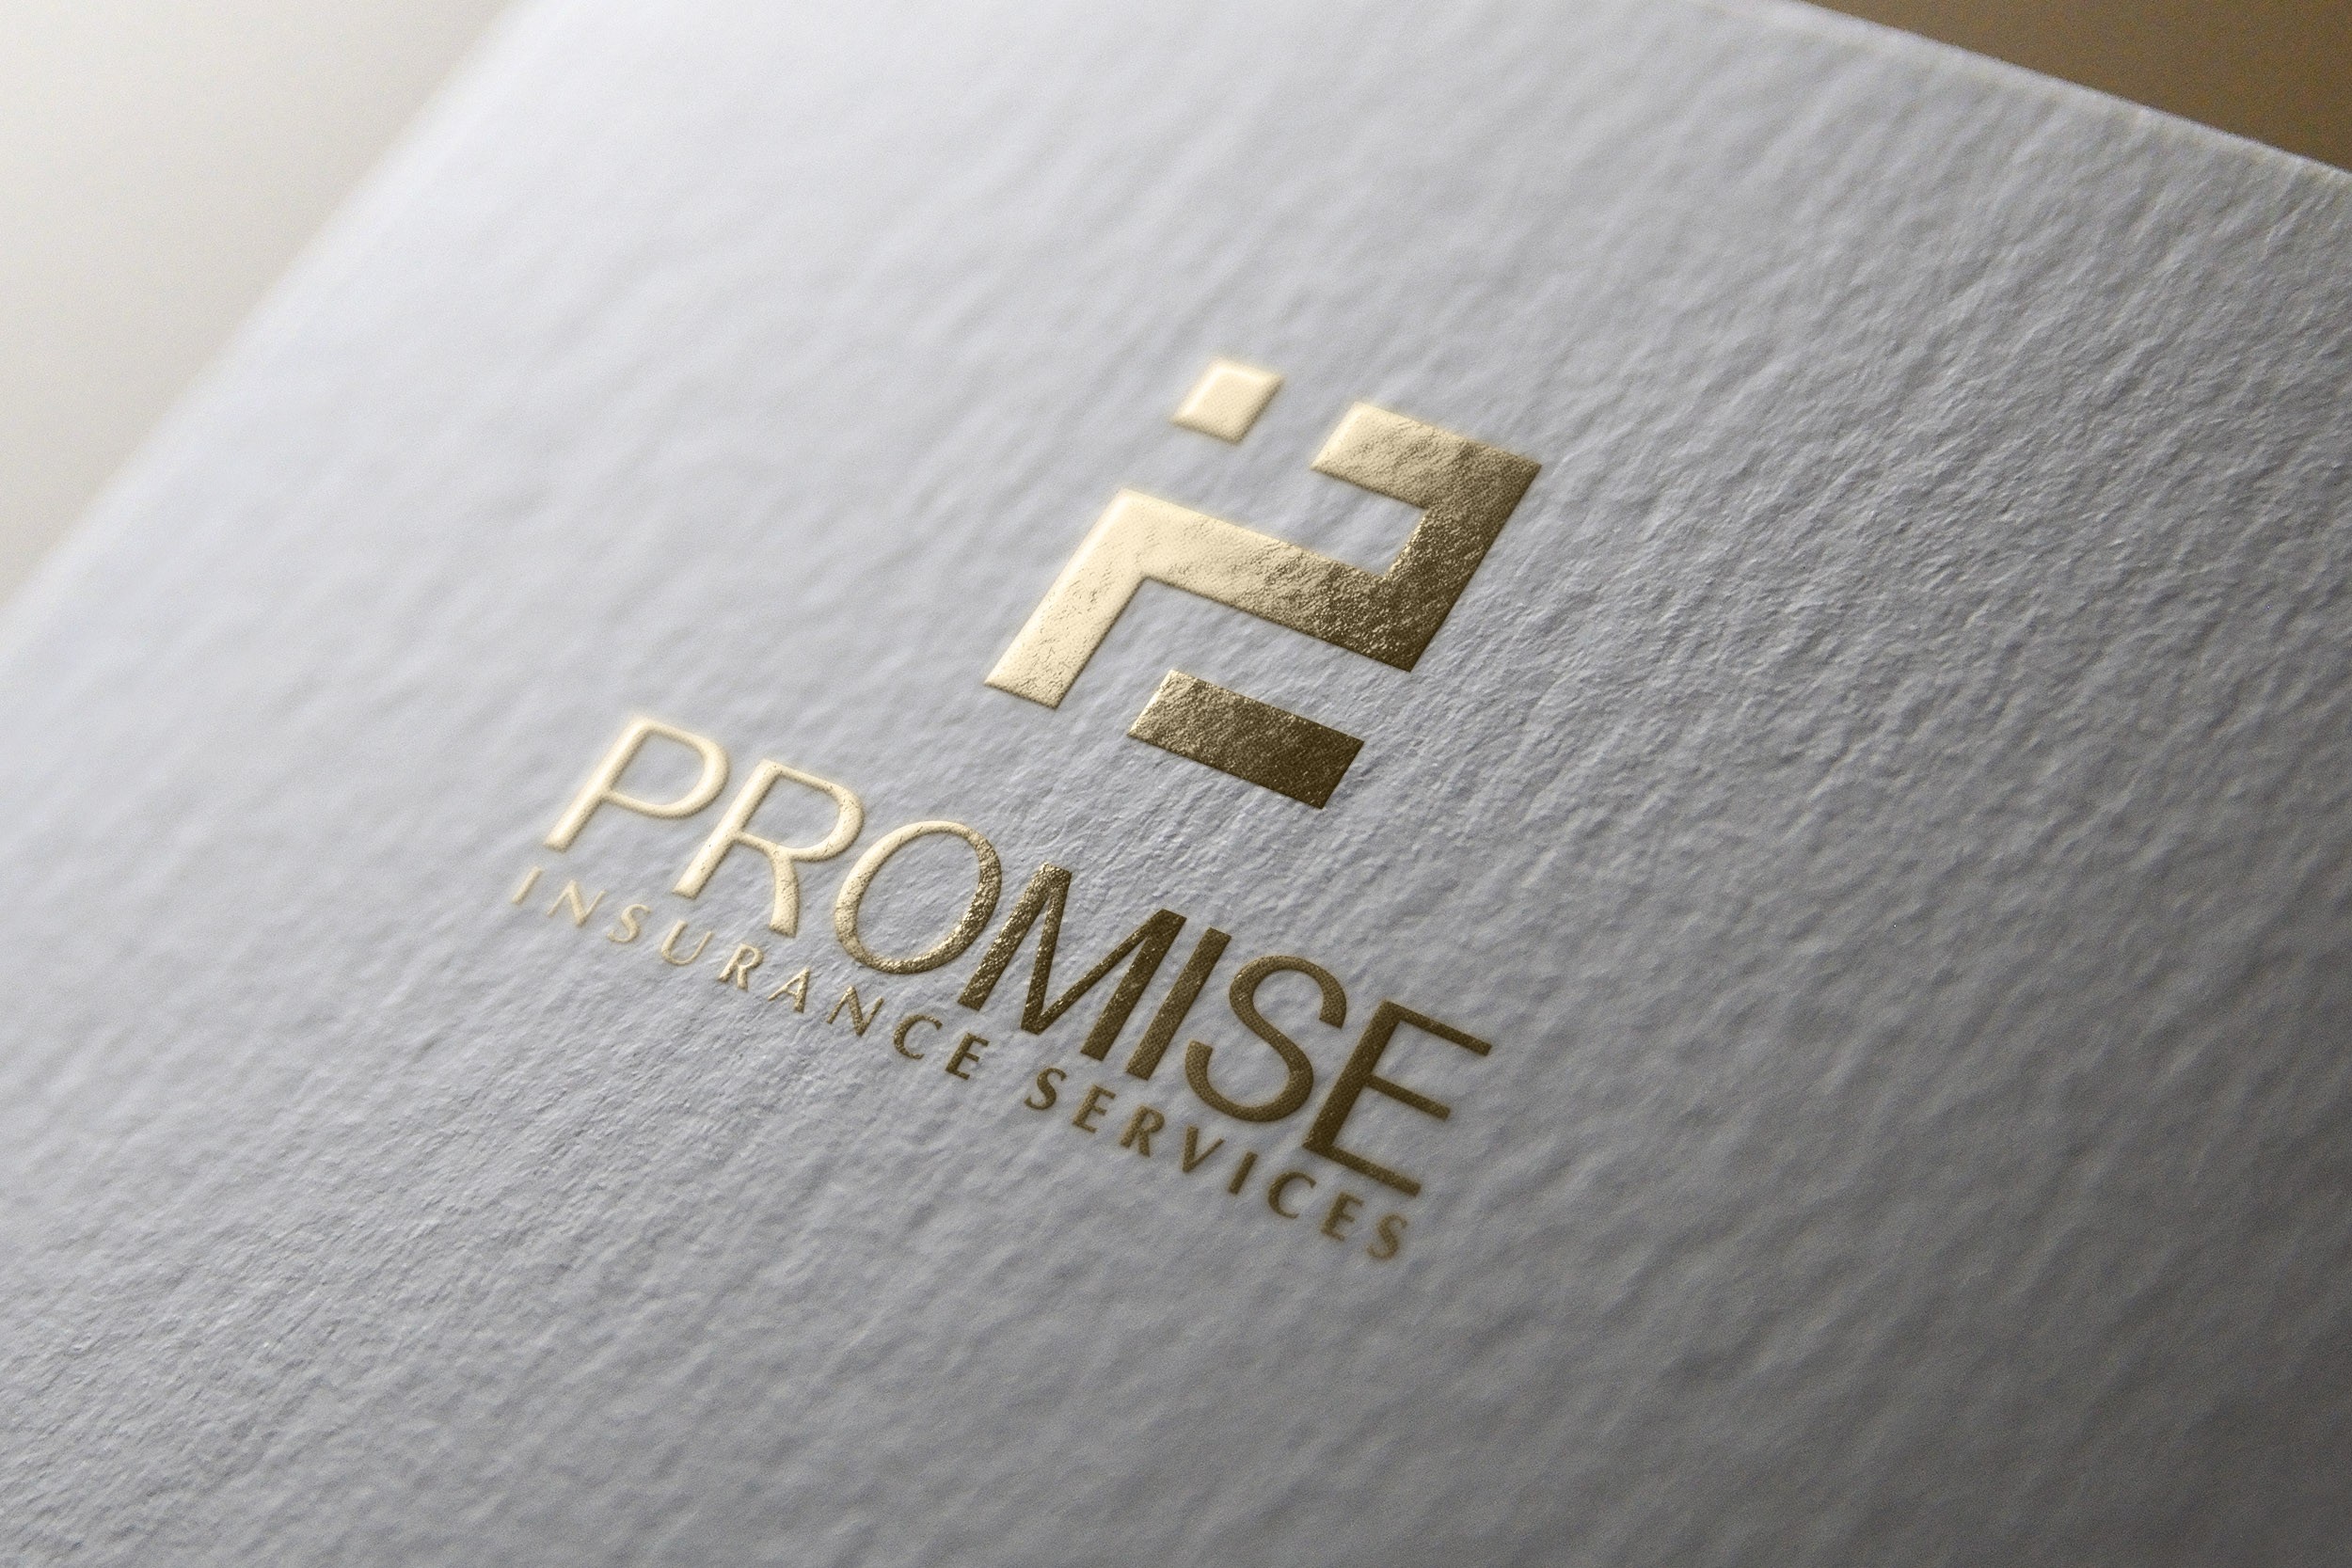 Promise Insurance Services